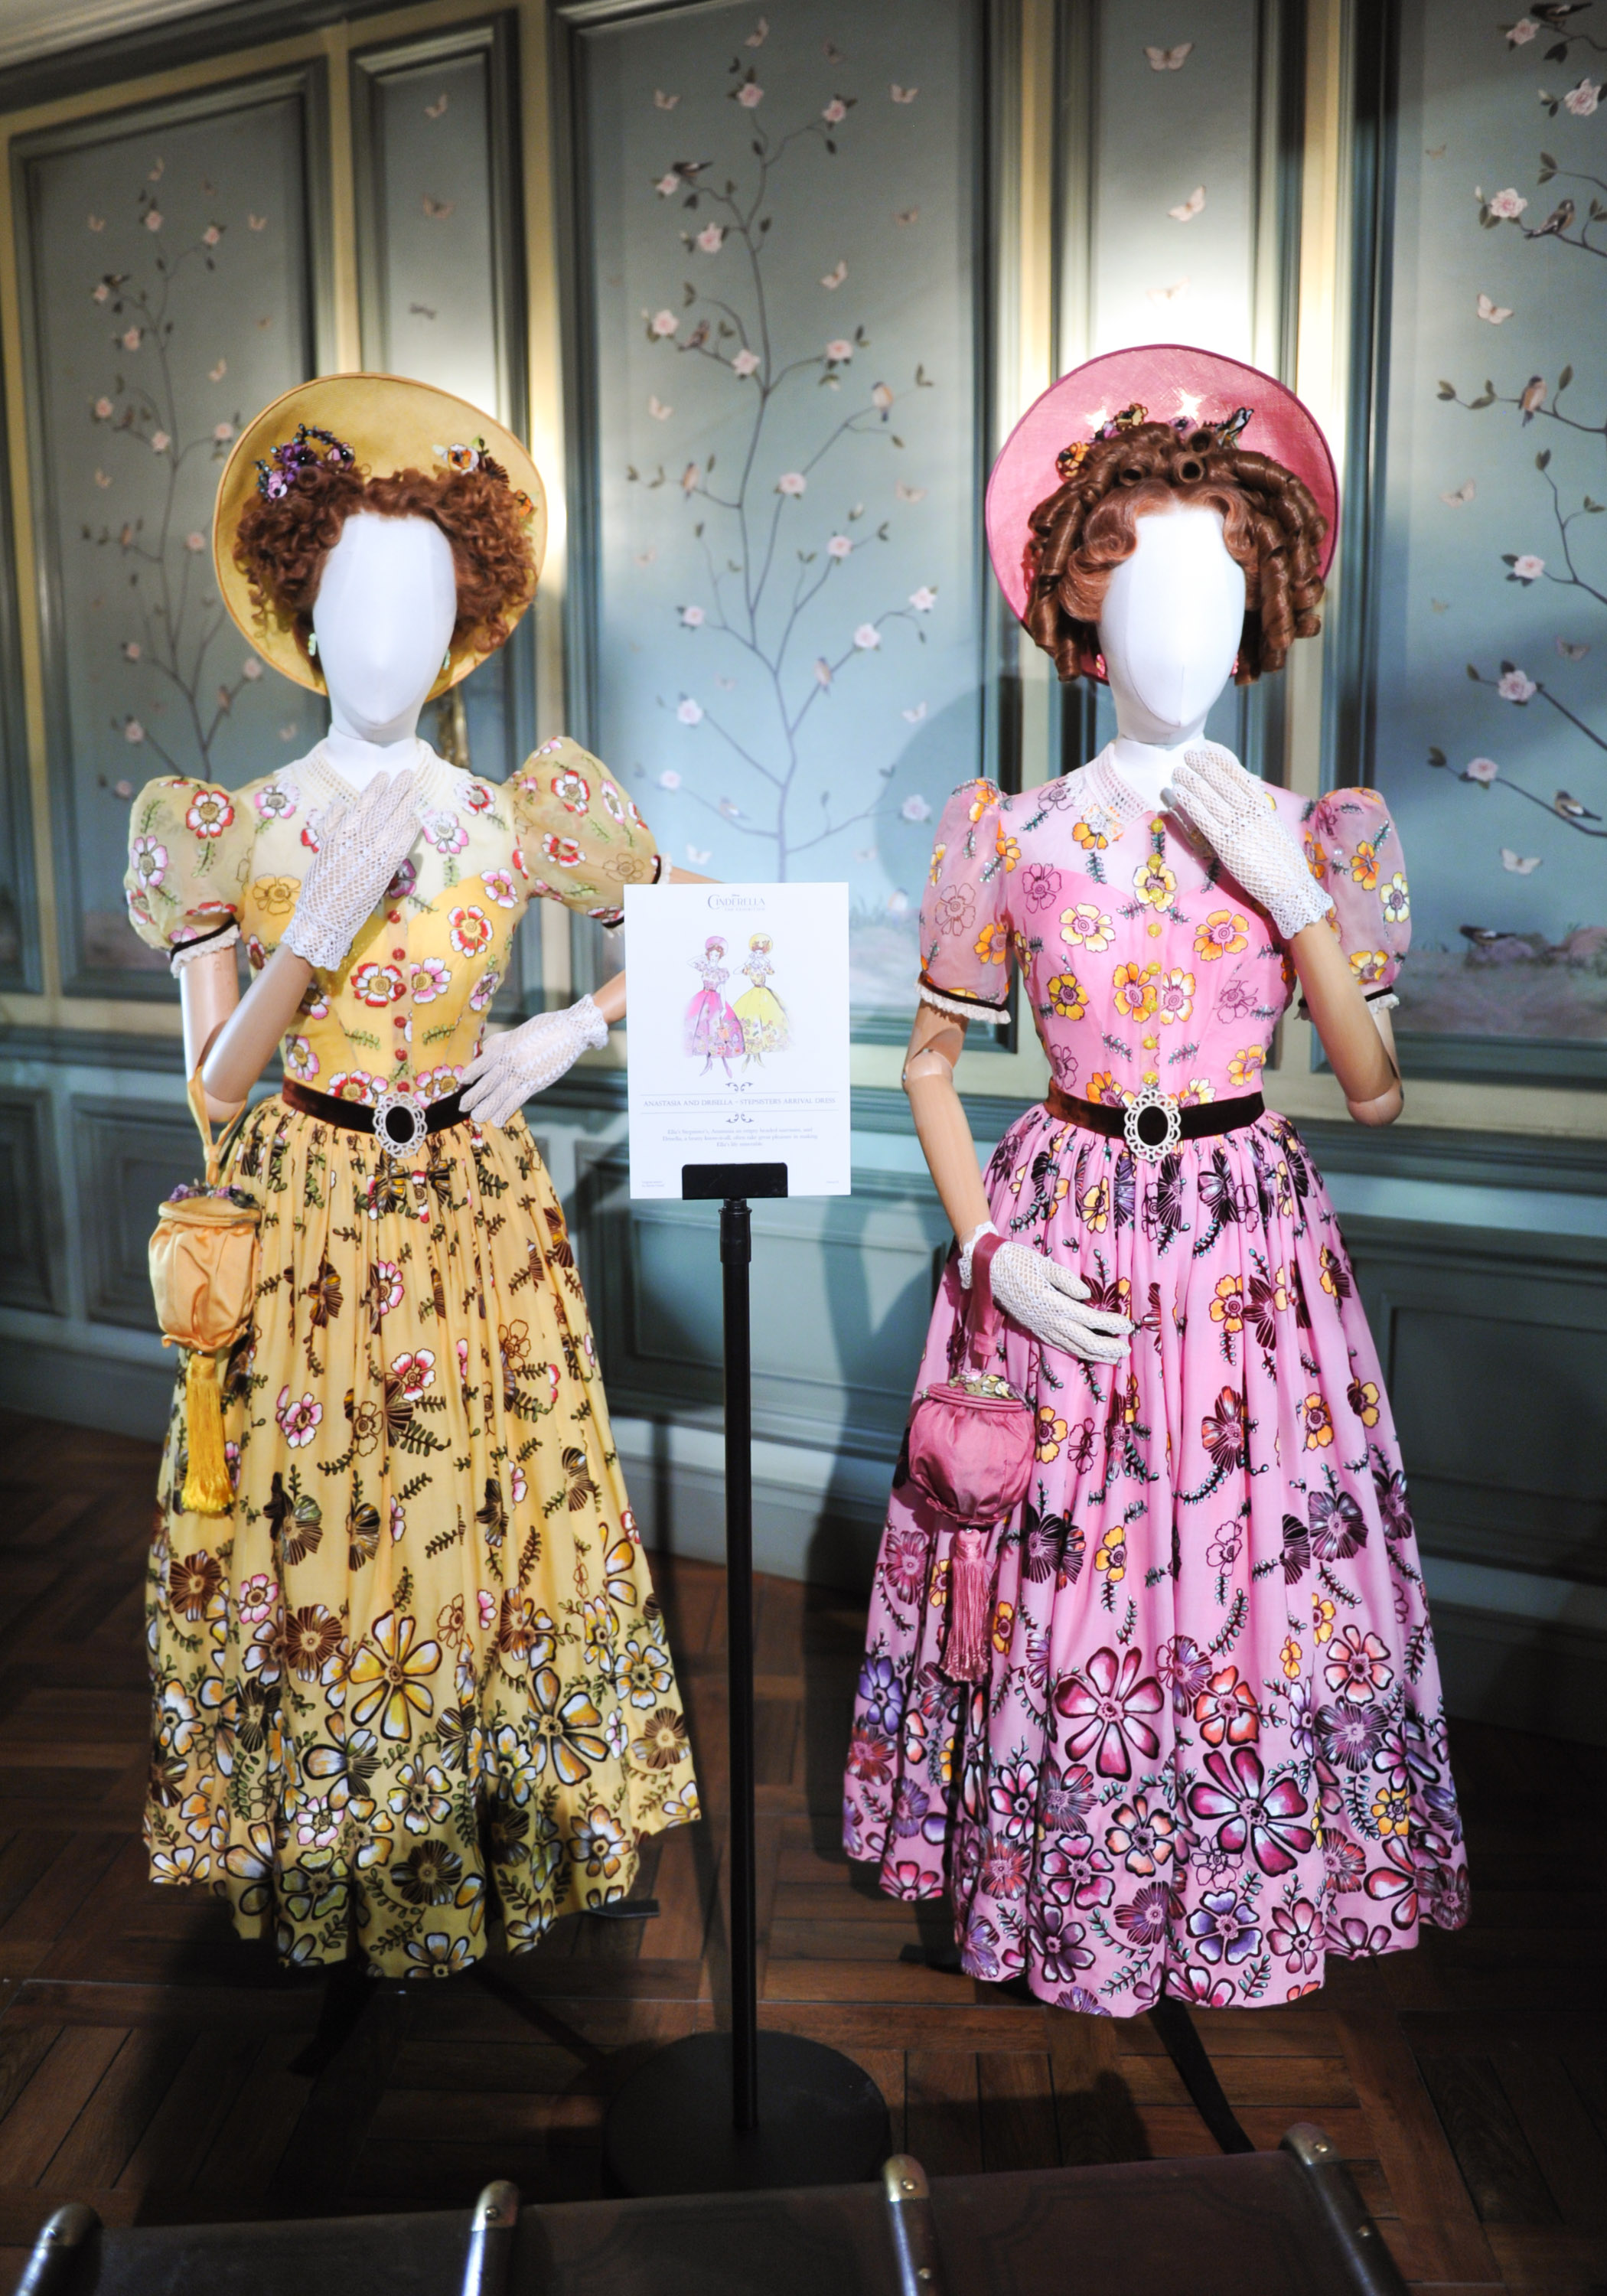 In the Entrance Hall, there were mannequins dressed in the costumes worn by Cinderella’s two stepsisters, Anastasia (played by Holliday Grainger) and Drisella (Sophie McShera). The girls were dressed in their arrival dresses, which featured handpainted flowers and different textures using a process called flocking.